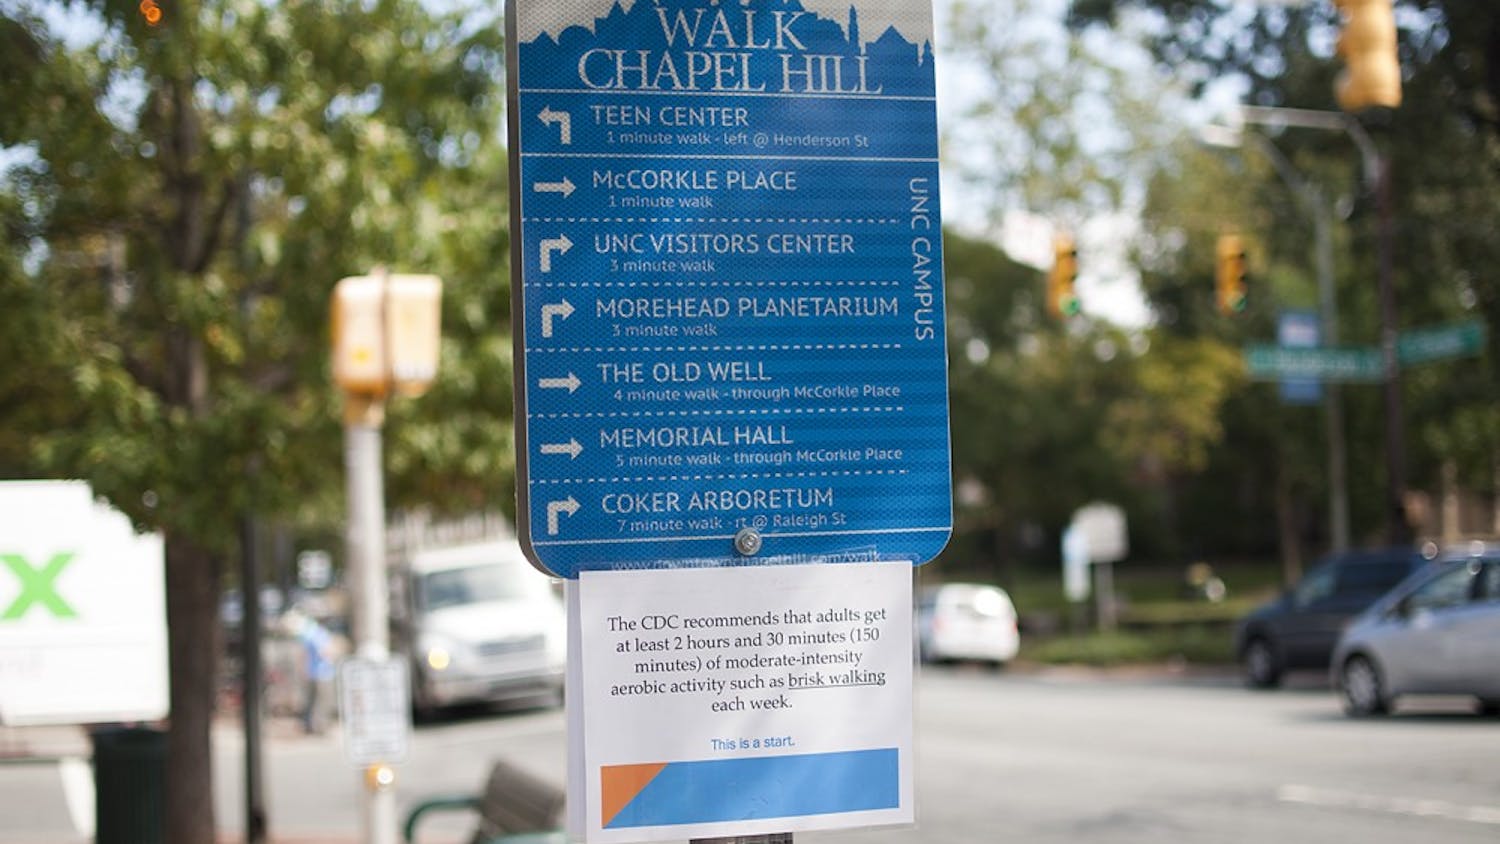 Walk Chapel Hill sign in front of the Courthouse gives directions to pedestrians to different downtown and campus destinations.